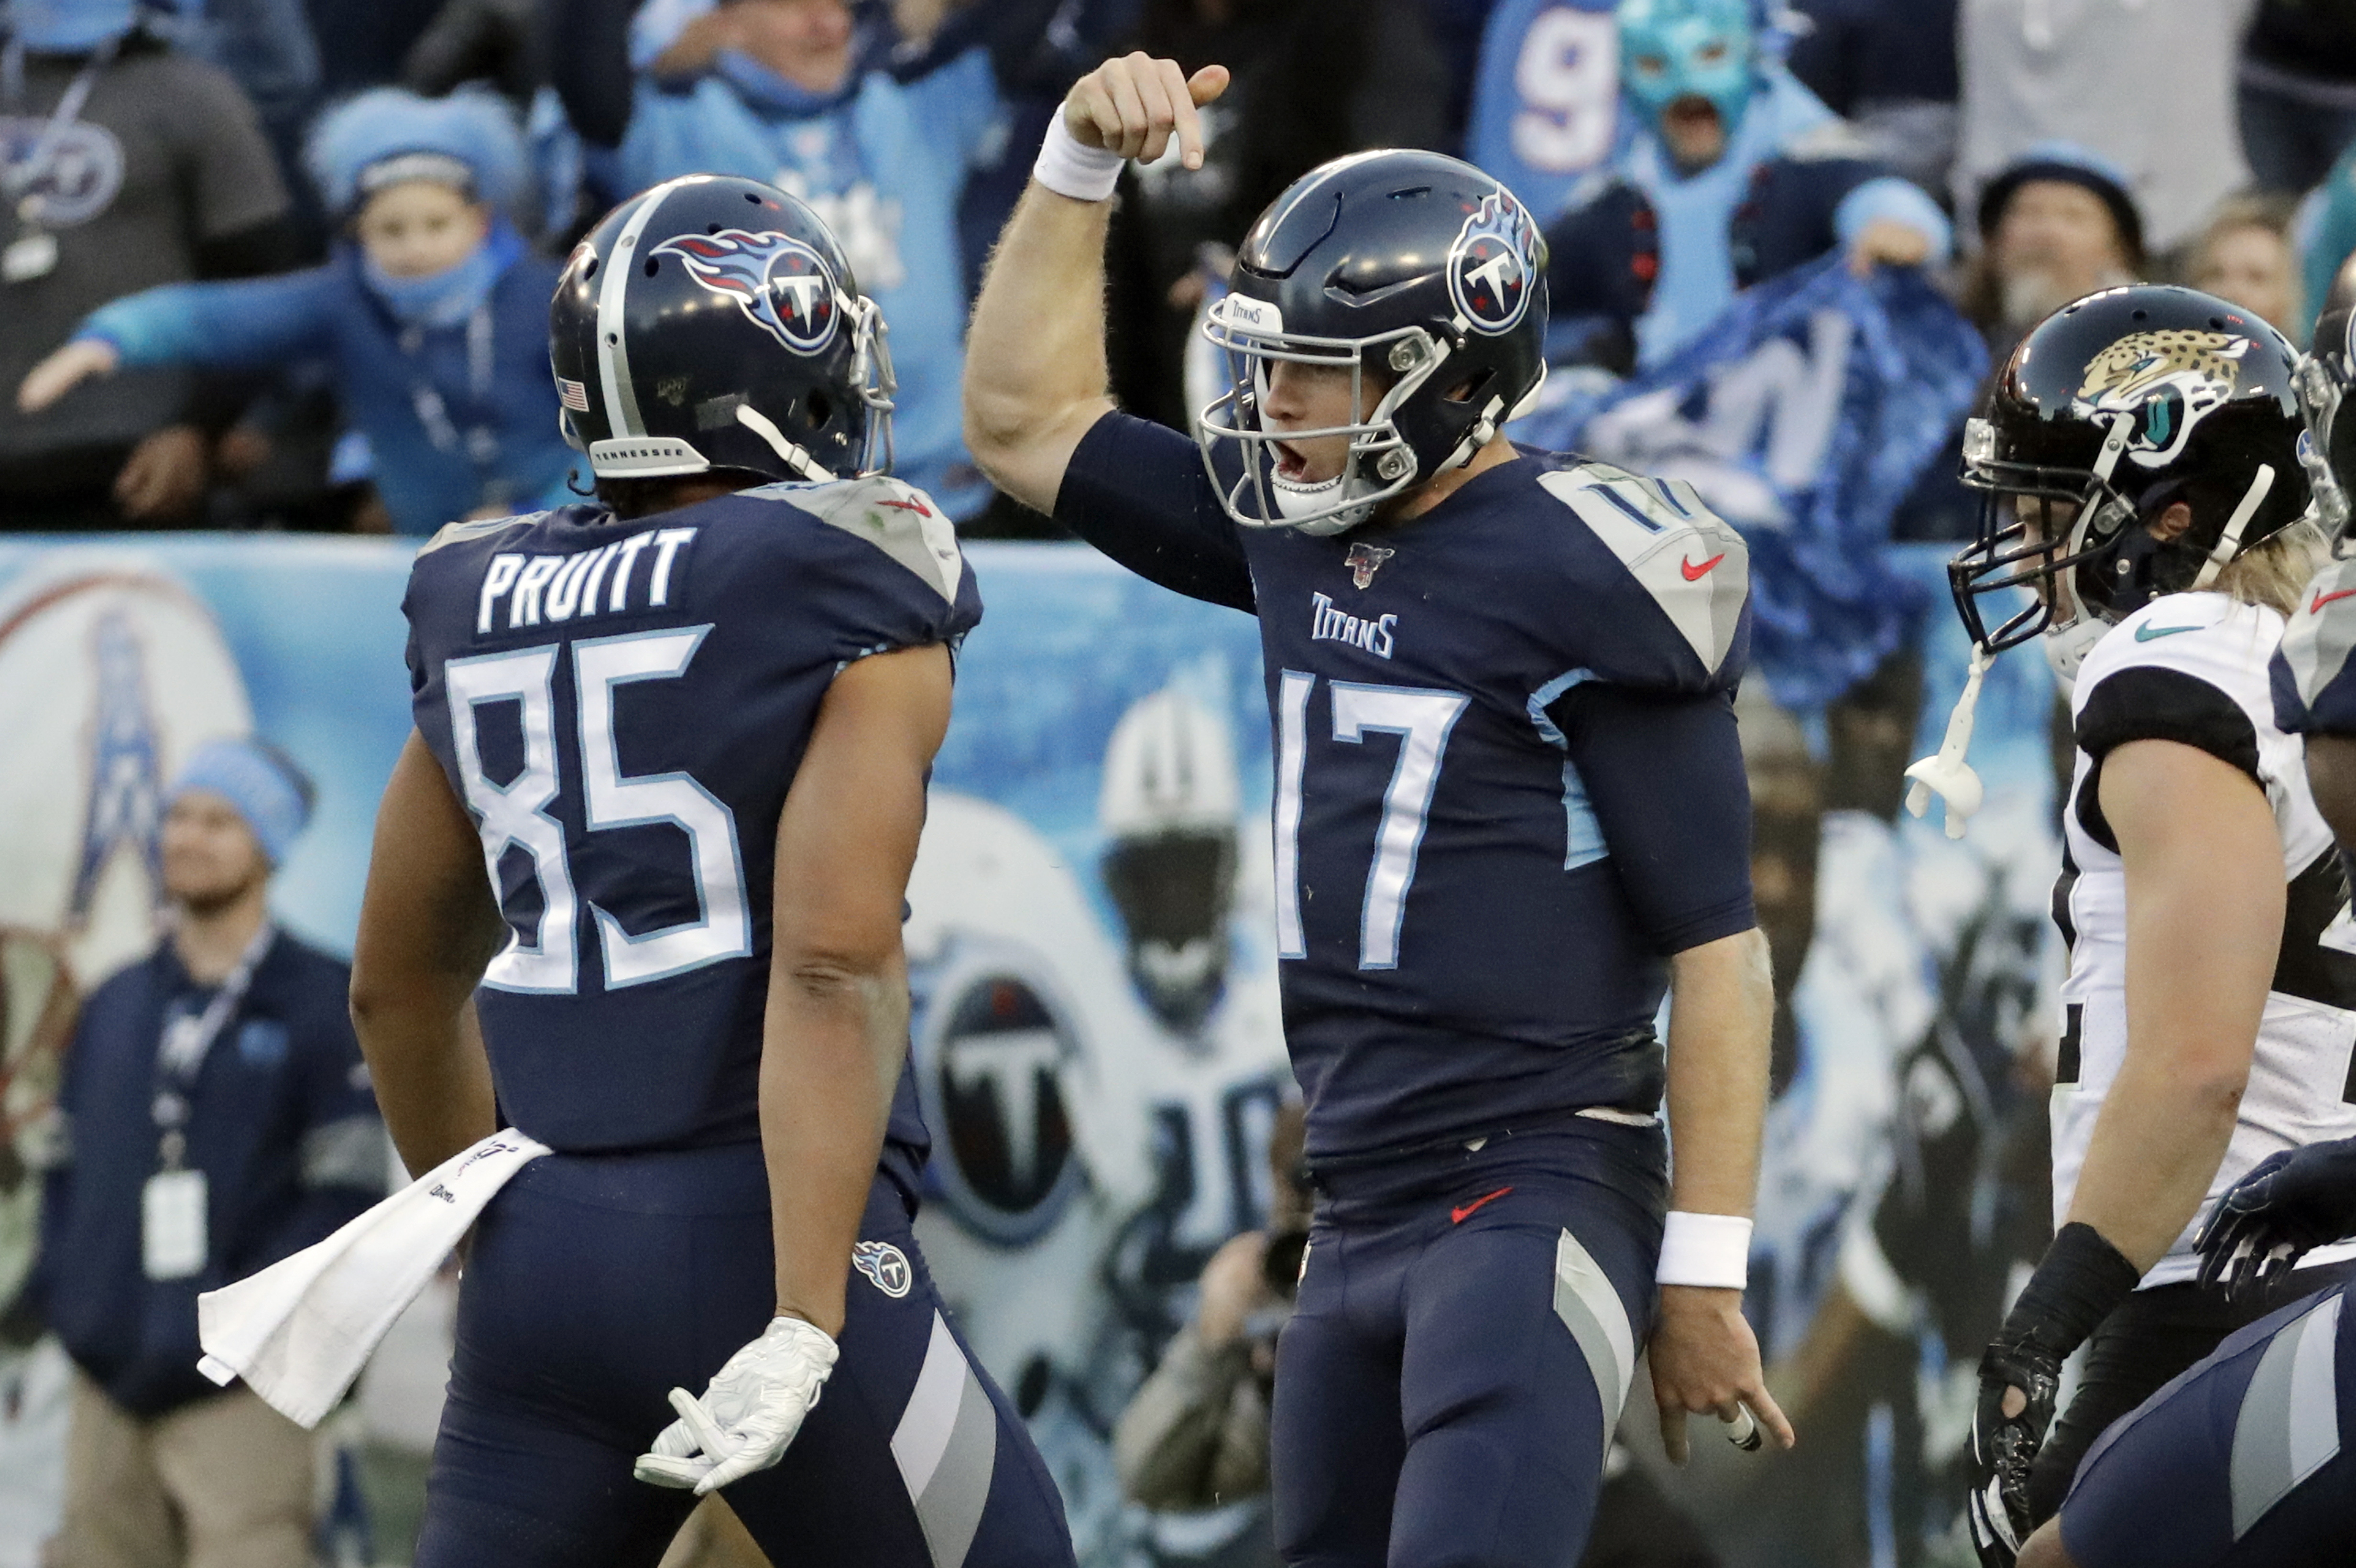 Having won 4 of 5, Titans have chance to control AFC South